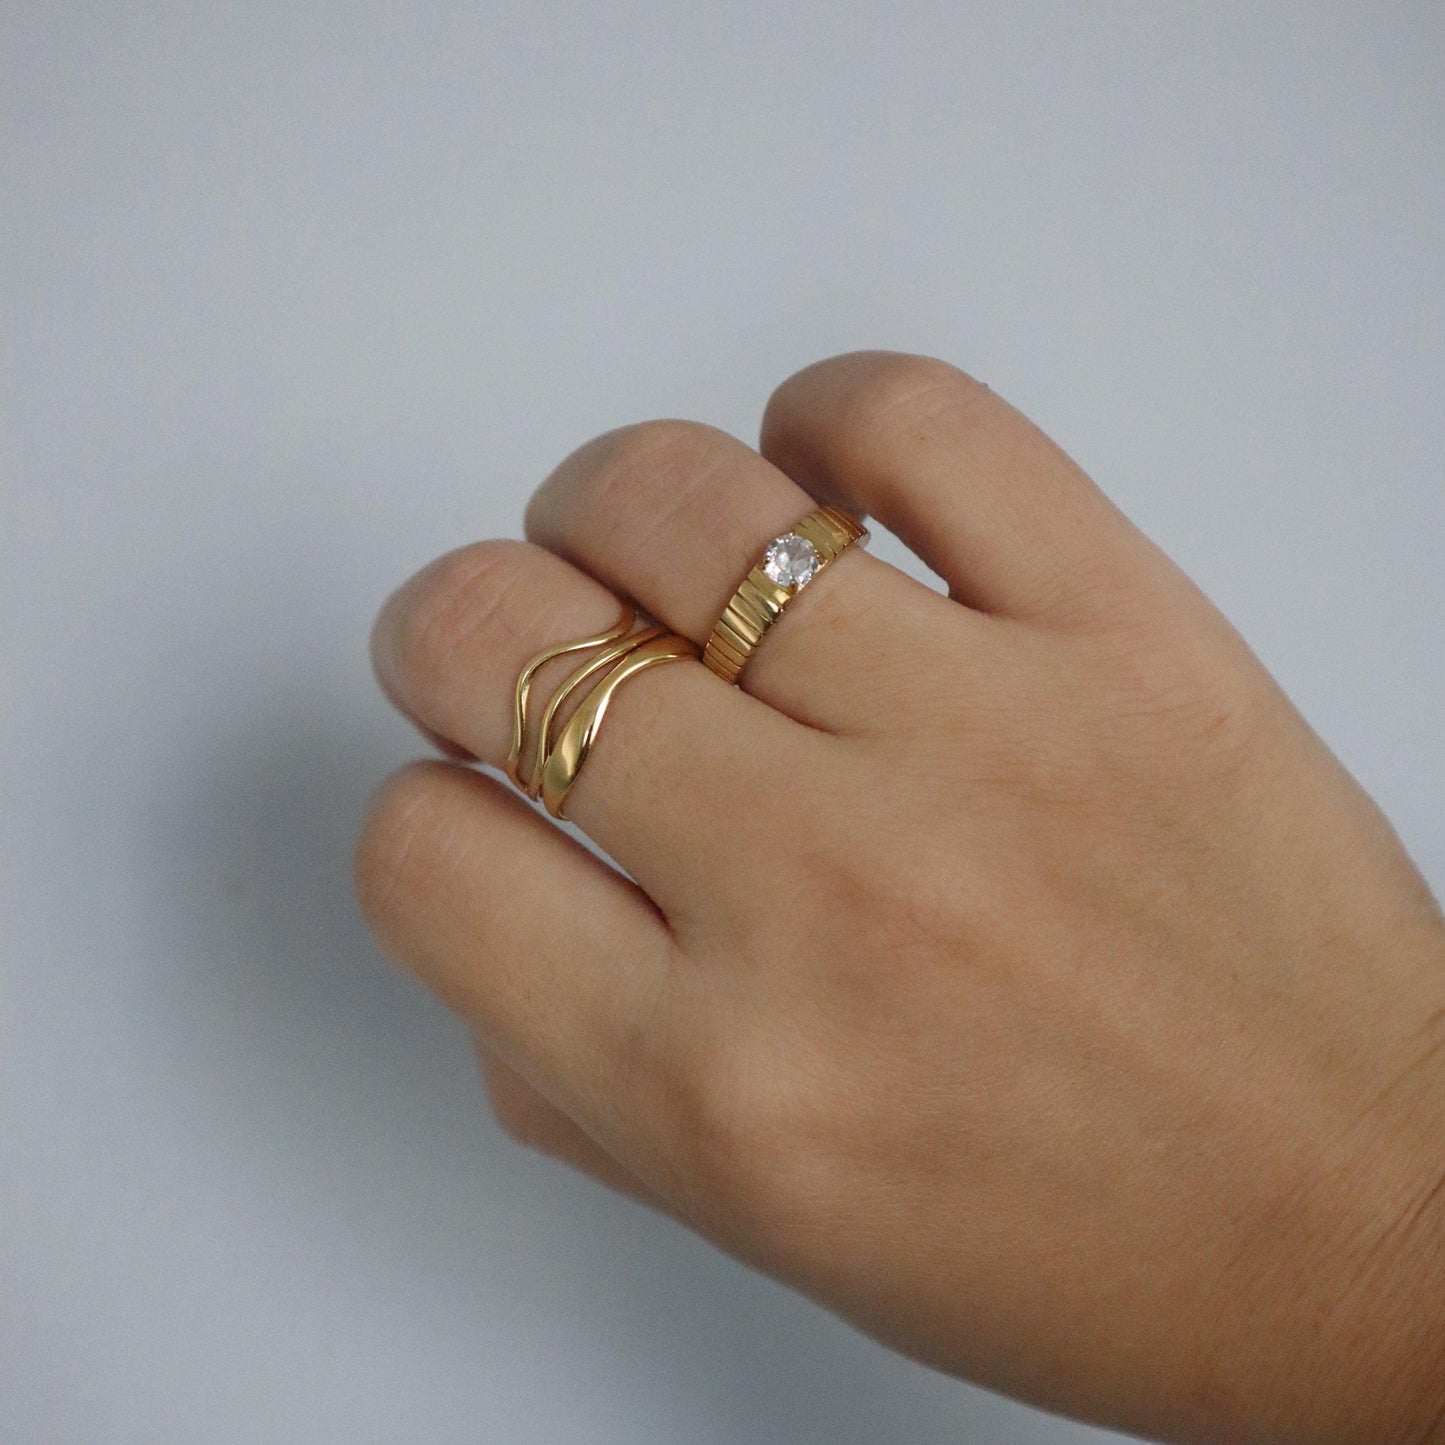 Wavy Ring | Adjustable Multilayer Ring - JESSA JEWELRY | GOLD JEWELRY; dainty, affordable gold everyday jewelry. Tarnish free, water-resistant, hypoallergenic. Jewelry for everyday wear